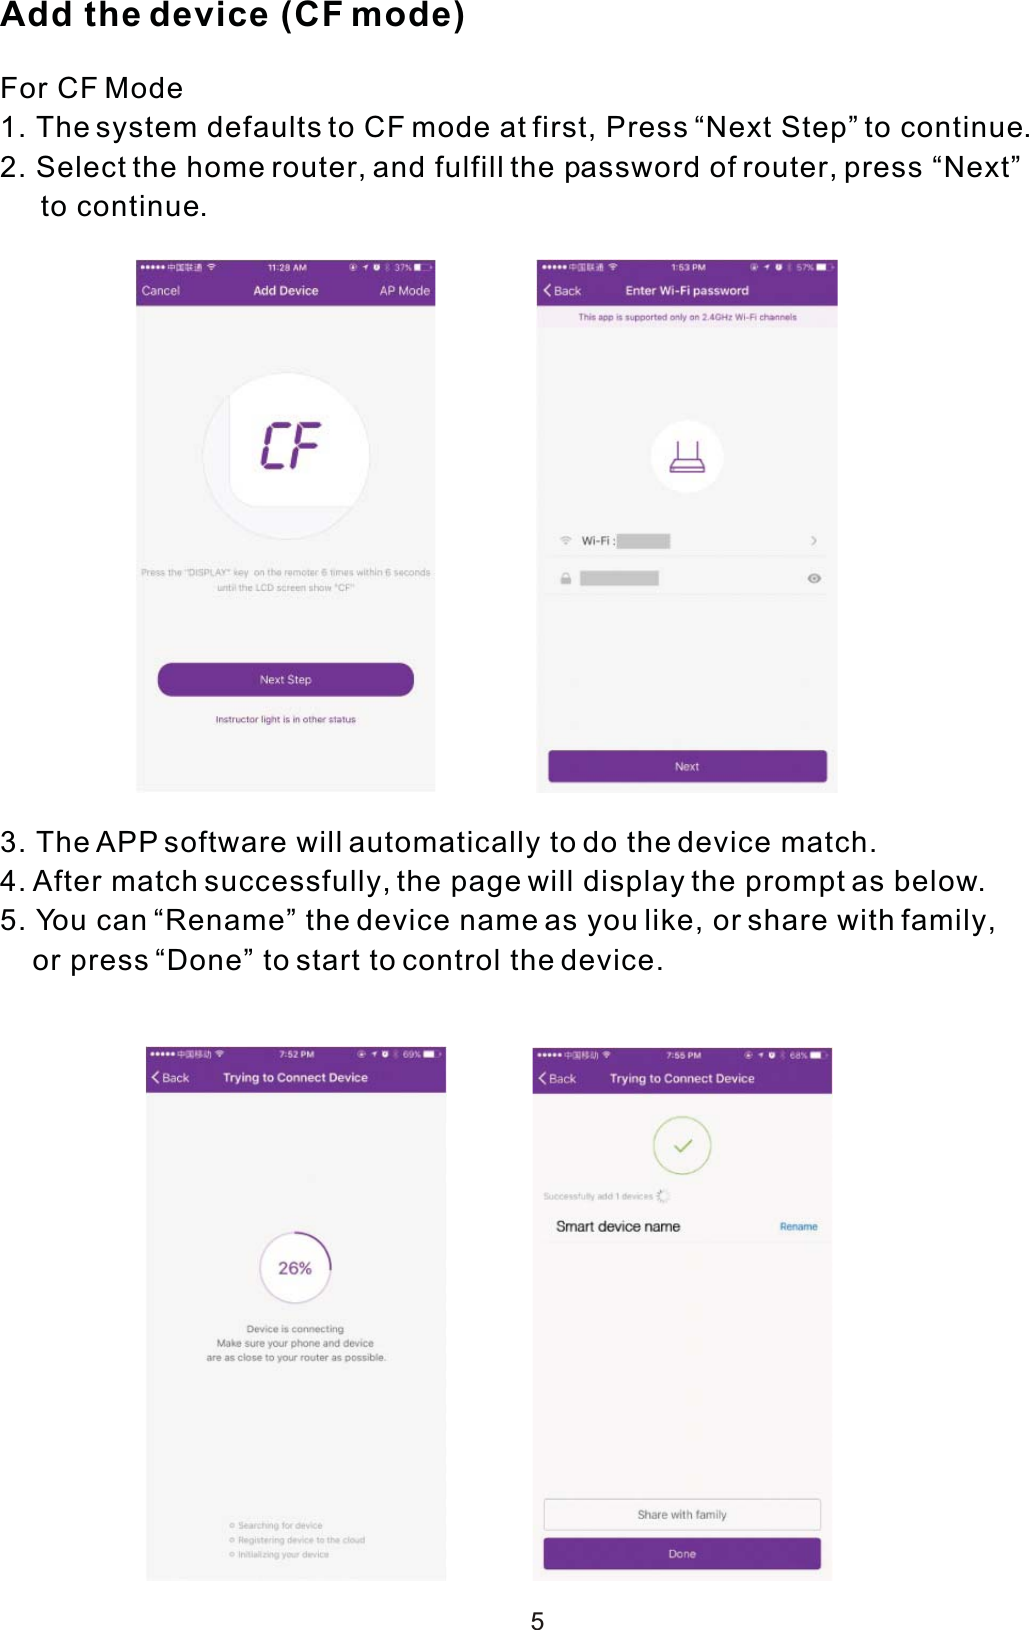 5Add the device (CF mode)For CF Mode1. The system defaults to CF mode at first, Press “Next Step” to continue.2. Select the home router, and fulfill the password of router, press “Next”     to continue.3. The APP software will automatically to do the device match. 4. After match successfully, the page will display the prompt as below.5. You can “Rename” the device name as you like, or share with family,    or press “Done” to start to control the device. 